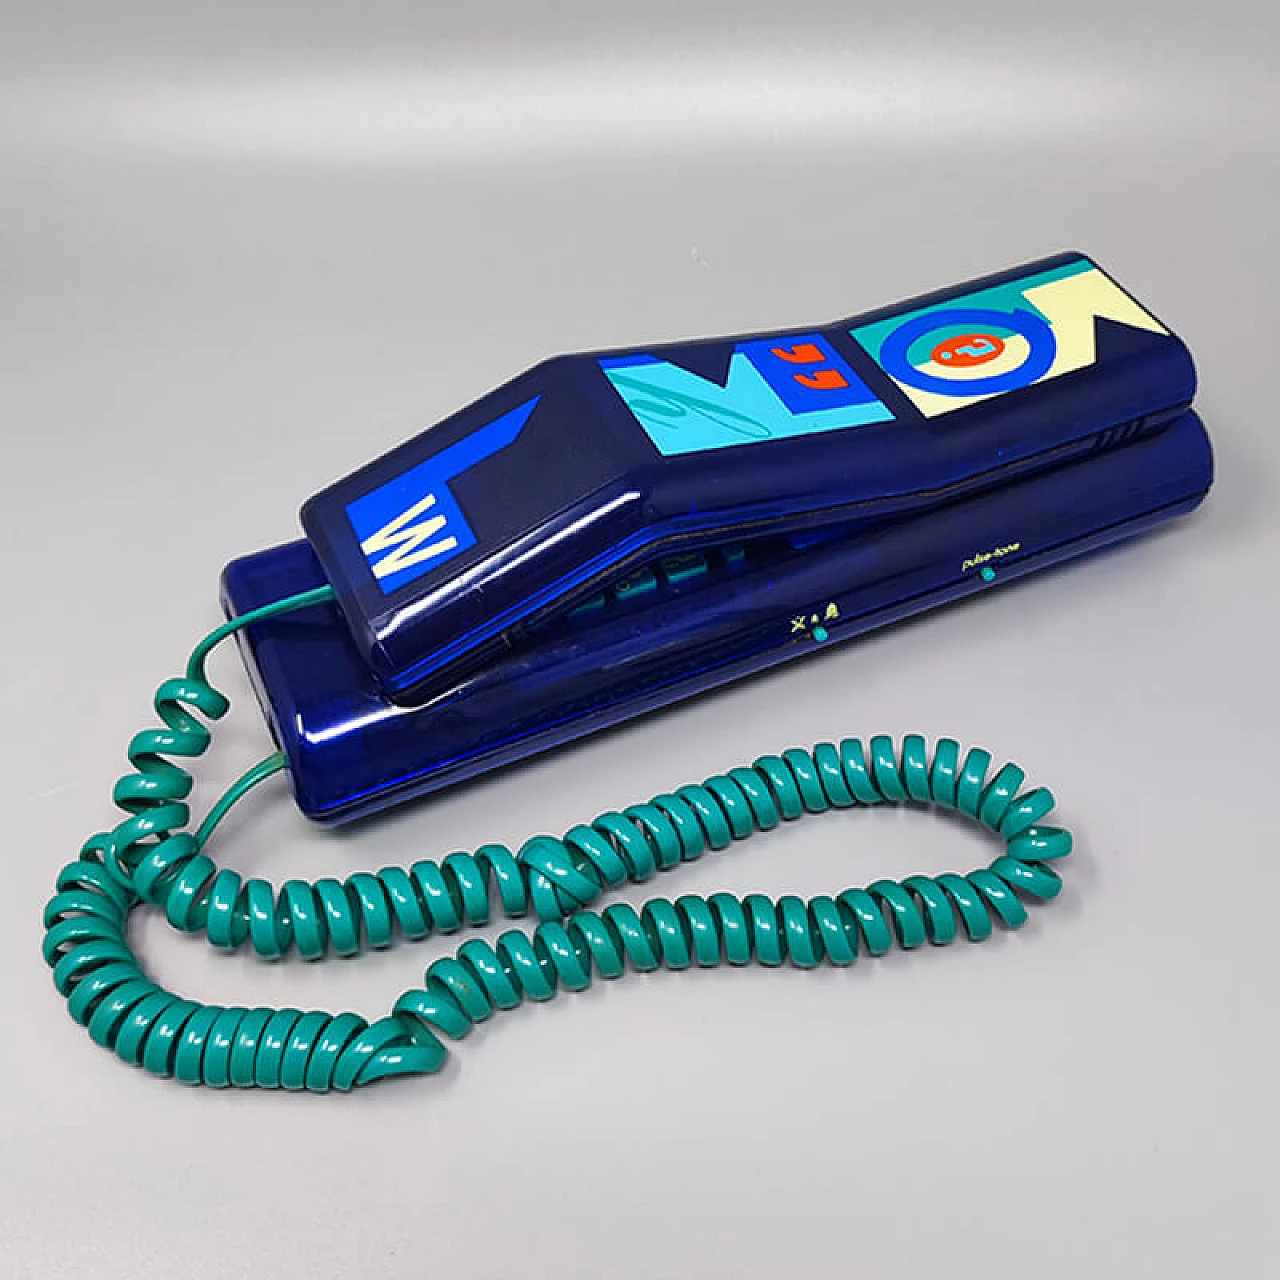 Swatch Twin Deluxe blue phone in Memphis-style, 1980s 1